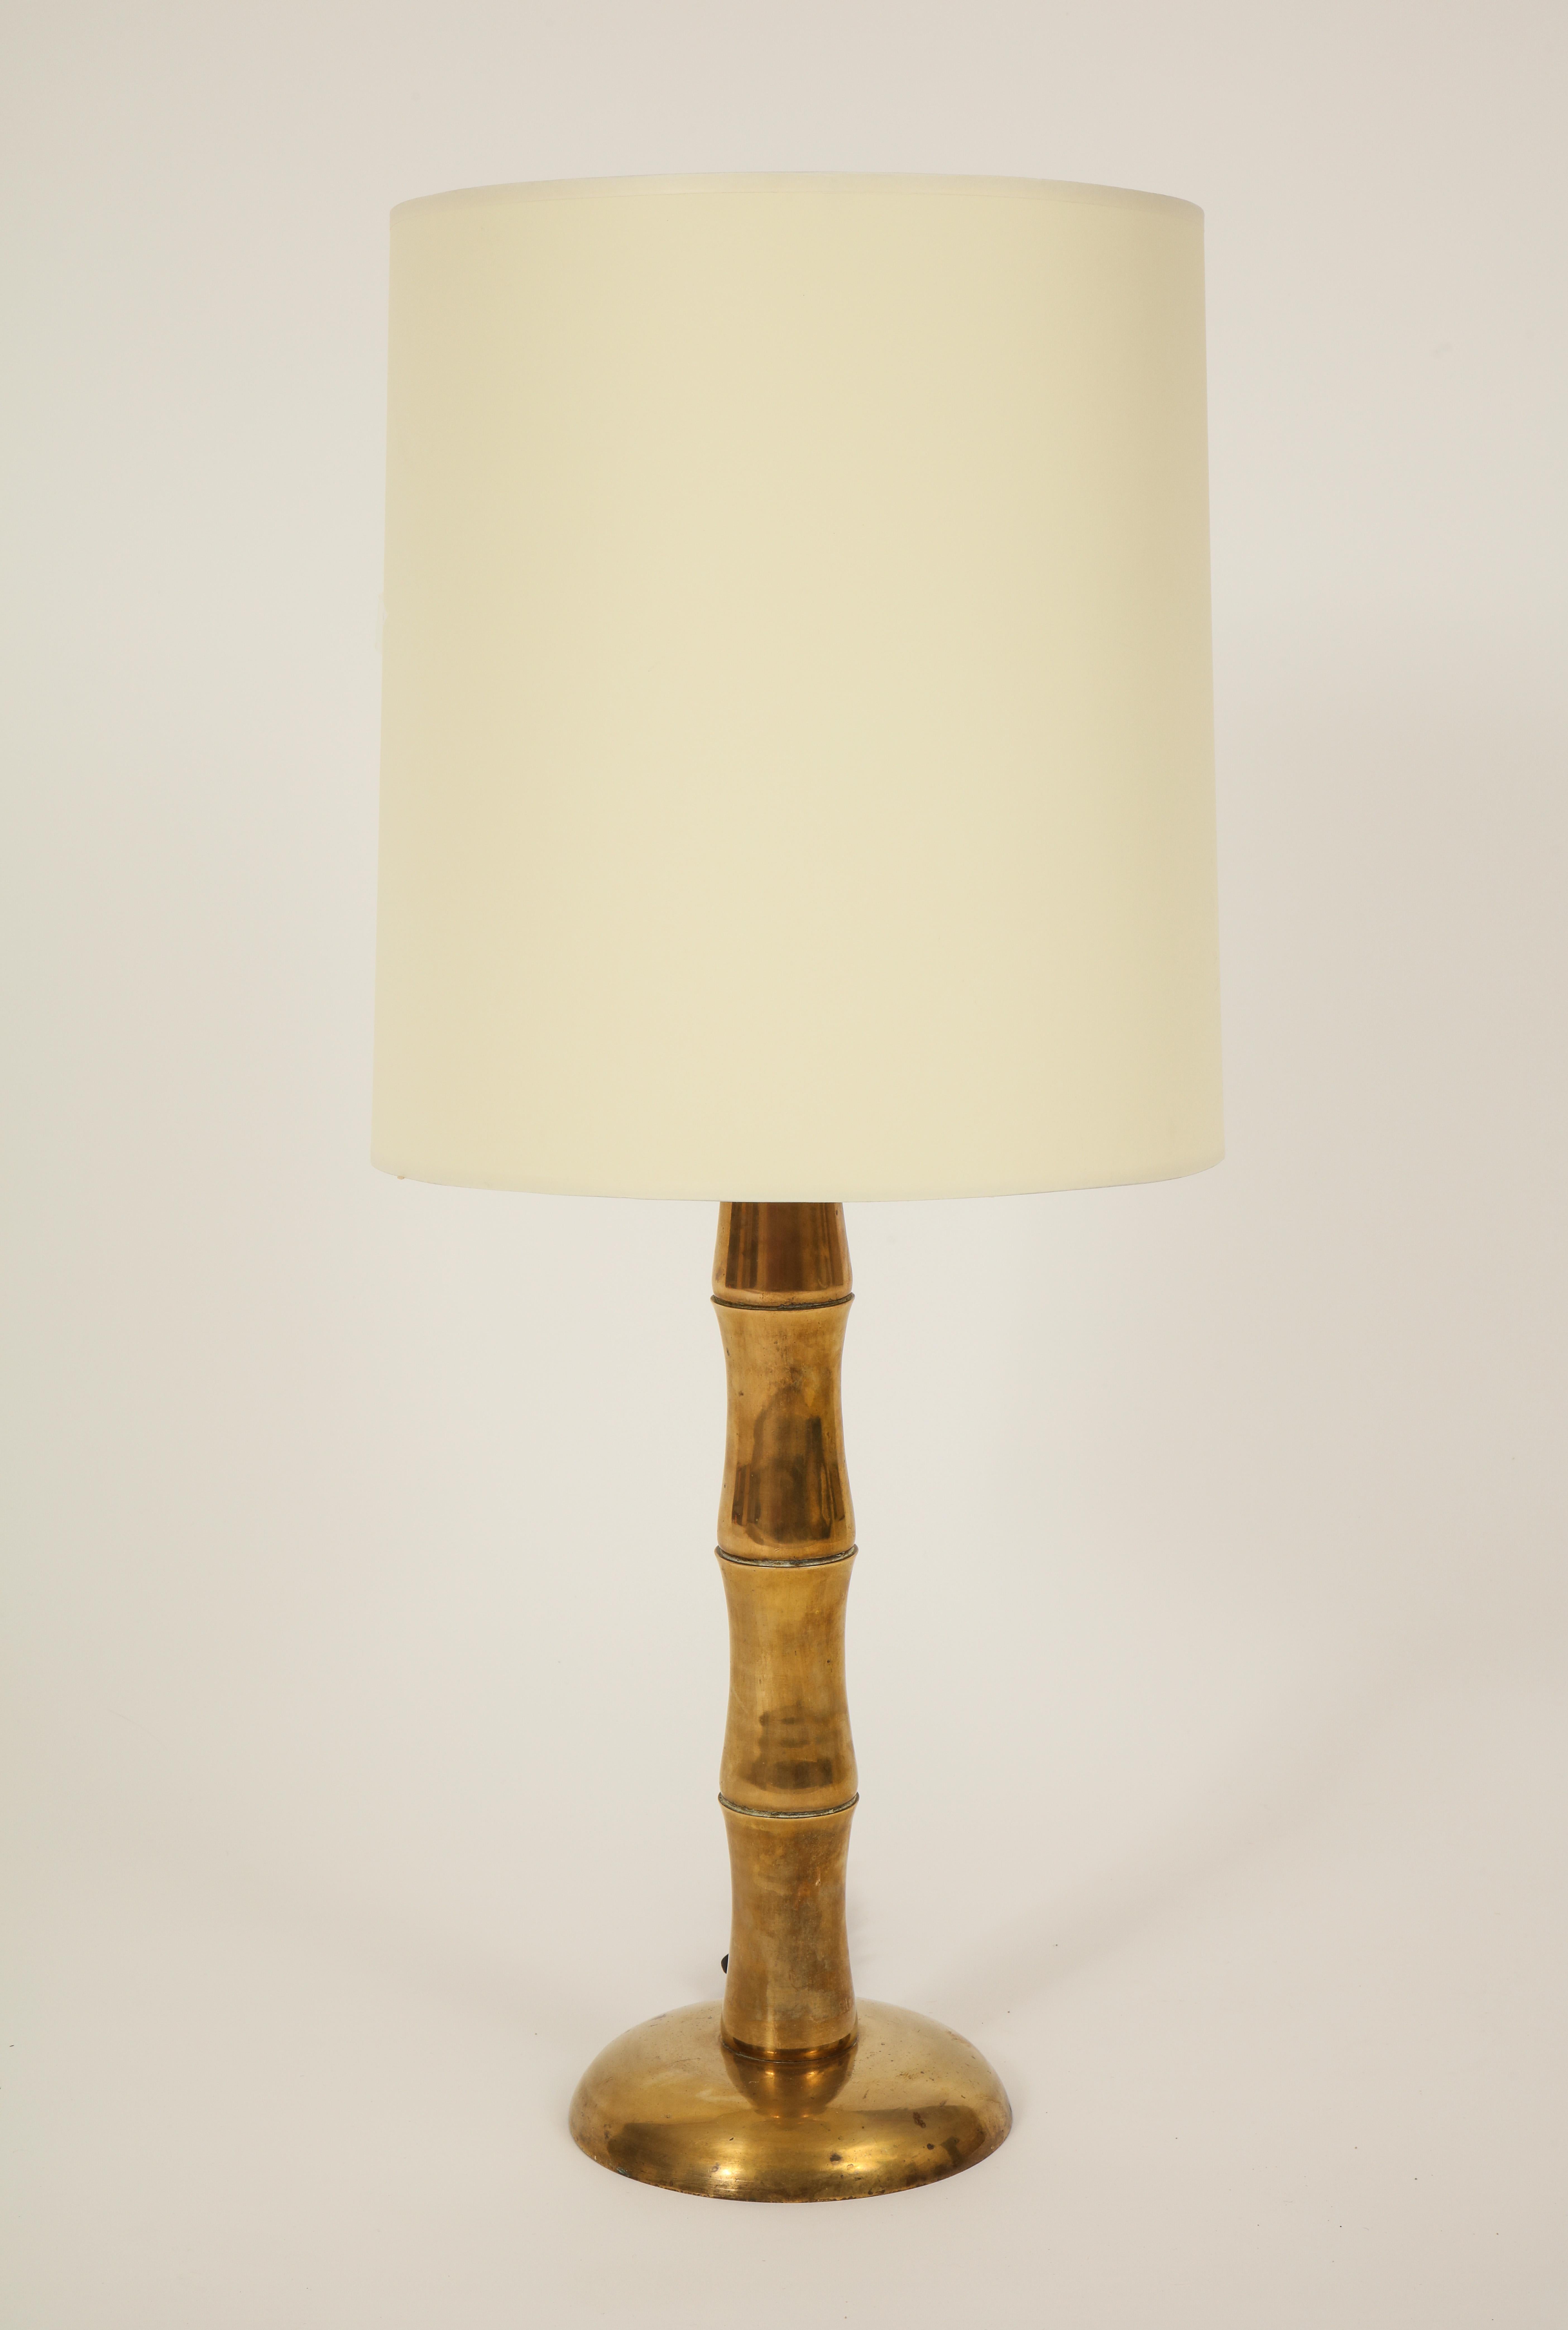 Jansen style bamboo brass French midcentury pair of table lamps.

Beautiful pair of brass lamps with perfect patina to the brass as shown in photos. The perfect height and look to any decor. Rewired for US. Silk Black cord attachment.
Shades not